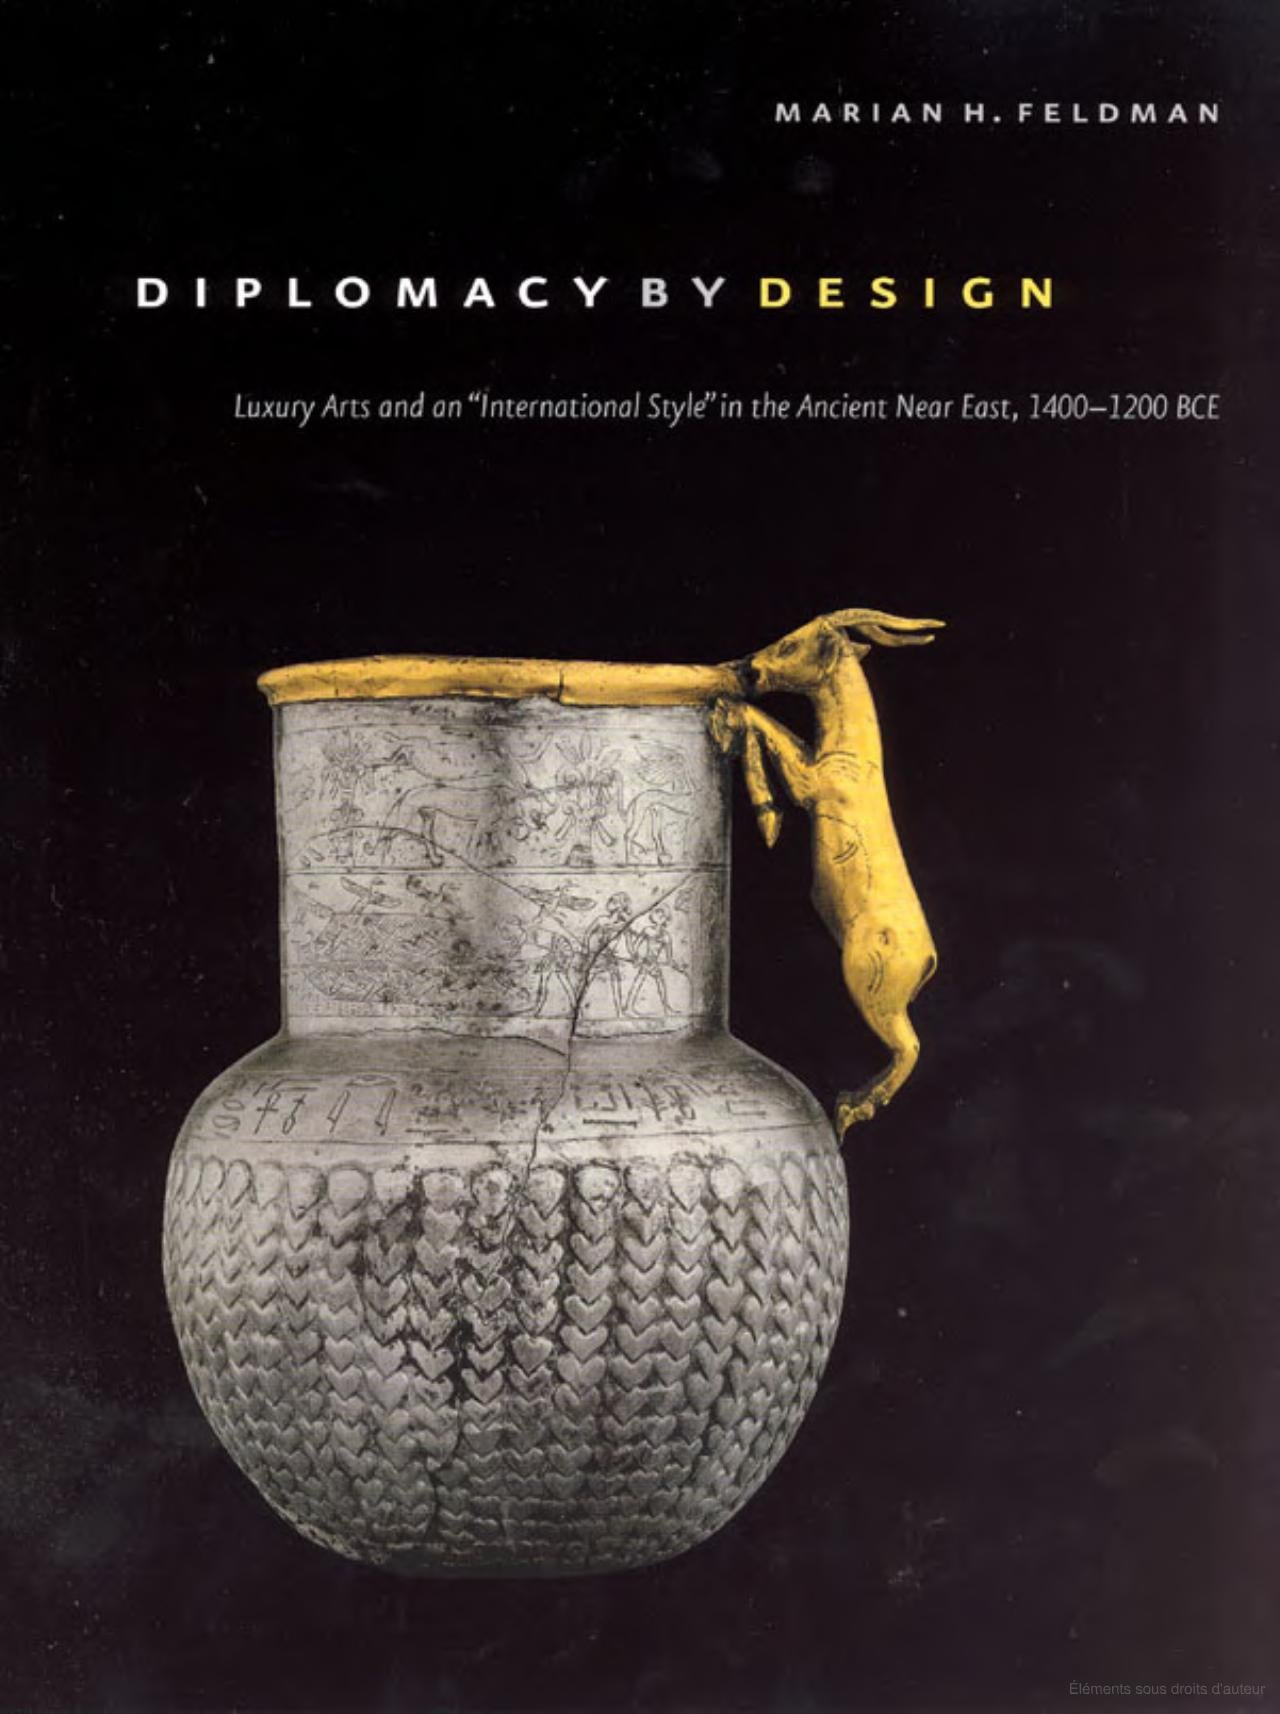 Diplomacy by design: Luxury Arts and a "International Style" in the Ancient Near East, 1400-1200 BCE.